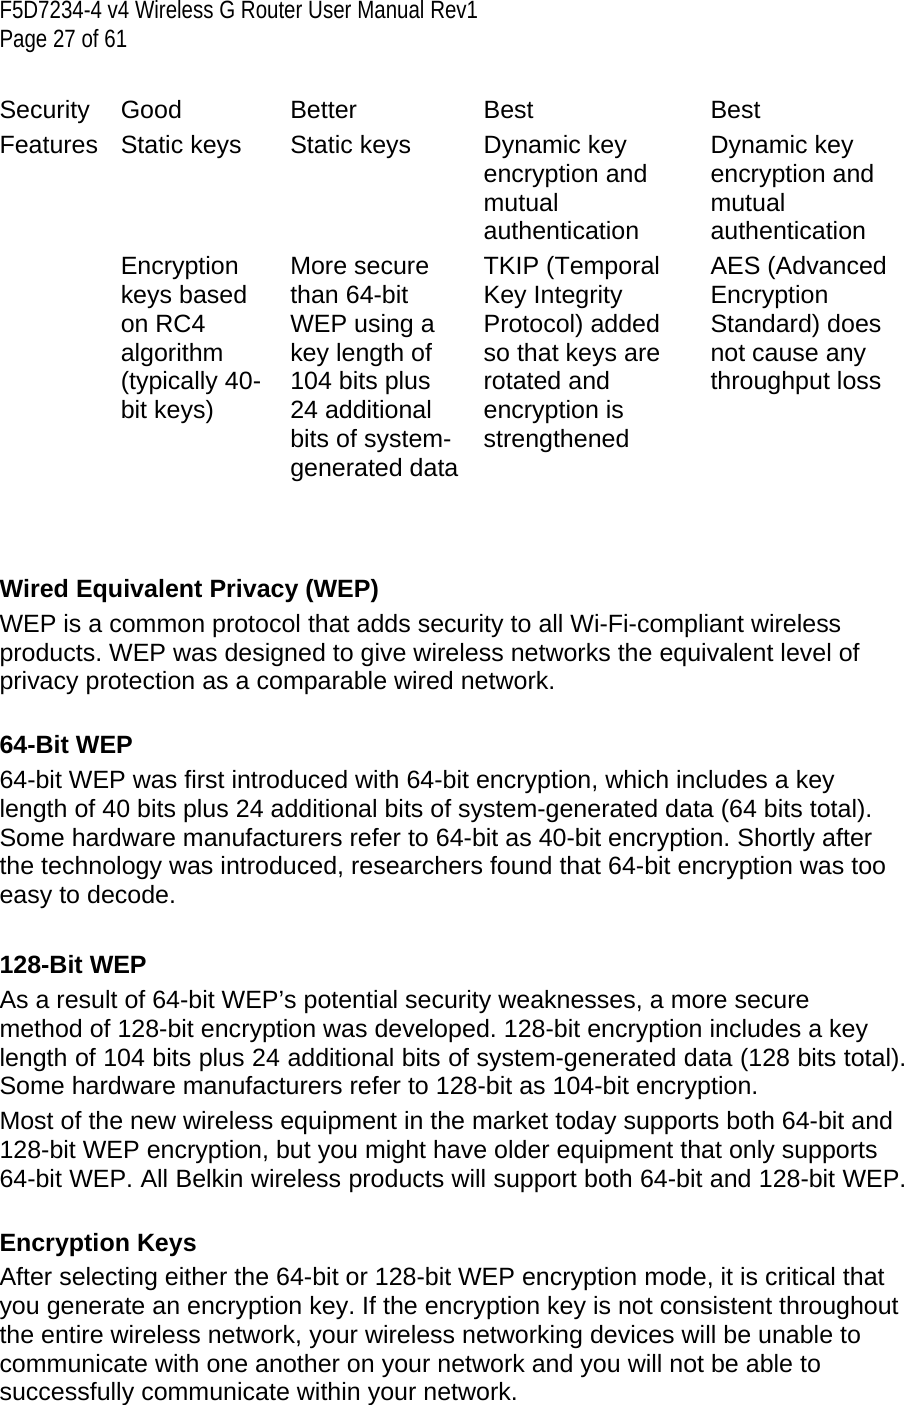 F5D7234-4 v4 Wireless G Router User Manual Rev1  Page 27 of 61   Security Good  Better  Best  Best Features  Static keys   Static keys   Dynamic key encryption and mutual authentication Dynamic key encryption and mutual authentication  Encryption keys based on RC4 algorithm (typically 40-bit keys) More secure than 64-bit WEP using a key length of 104 bits plus 24 additional bits of system-generated dataTKIP (Temporal Key Integrity Protocol) added so that keys are rotated and encryption is strengthened AES (Advanced Encryption Standard) does not cause any throughput loss    Wired Equivalent Privacy (WEP) WEP is a common protocol that adds security to all Wi-Fi-compliant wireless products. WEP was designed to give wireless networks the equivalent level of privacy protection as a comparable wired network.   64-Bit WEP 64-bit WEP was first introduced with 64-bit encryption, which includes a key length of 40 bits plus 24 additional bits of system-generated data (64 bits total). Some hardware manufacturers refer to 64-bit as 40-bit encryption. Shortly after the technology was introduced, researchers found that 64-bit encryption was too easy to decode. 128-Bit WEP  As a result of 64-bit WEP’s potential security weaknesses, a more secure method of 128-bit encryption was developed. 128-bit encryption includes a key length of 104 bits plus 24 additional bits of system-generated data (128 bits total). Some hardware manufacturers refer to 128-bit as 104-bit encryption.  Most of the new wireless equipment in the market today supports both 64-bit and 128-bit WEP encryption, but you might have older equipment that only supports 64-bit WEP. All Belkin wireless products will support both 64-bit and 128-bit WEP.  Encryption Keys After selecting either the 64-bit or 128-bit WEP encryption mode, it is critical that you generate an encryption key. If the encryption key is not consistent throughout the entire wireless network, your wireless networking devices will be unable to communicate with one another on your network and you will not be able to successfully communicate within your network.  